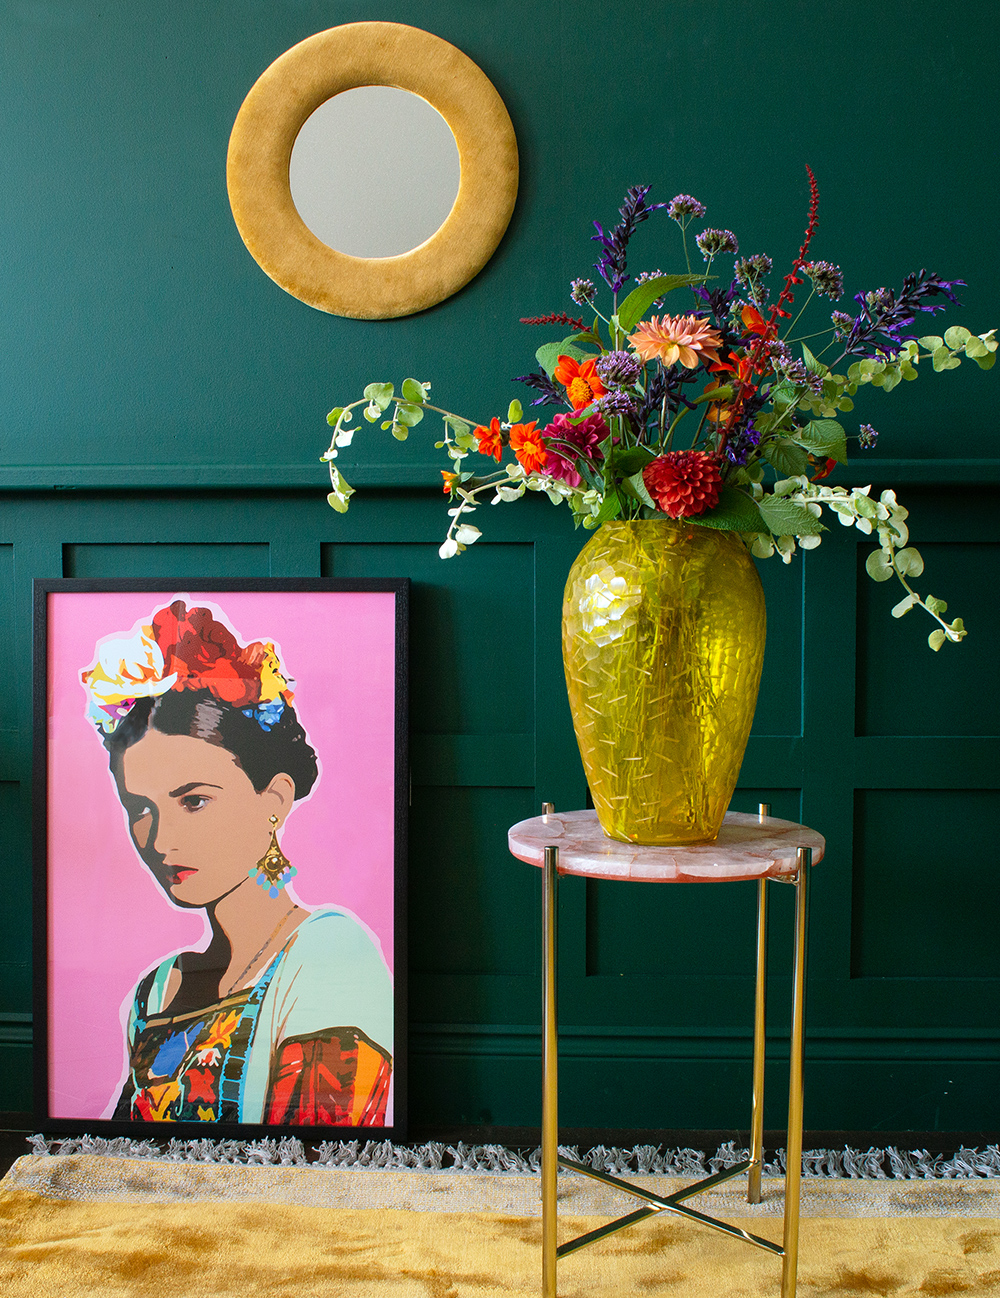 Frida Kahlo style artwork propped on the floor, perfect styling if you live in a rented house or flat